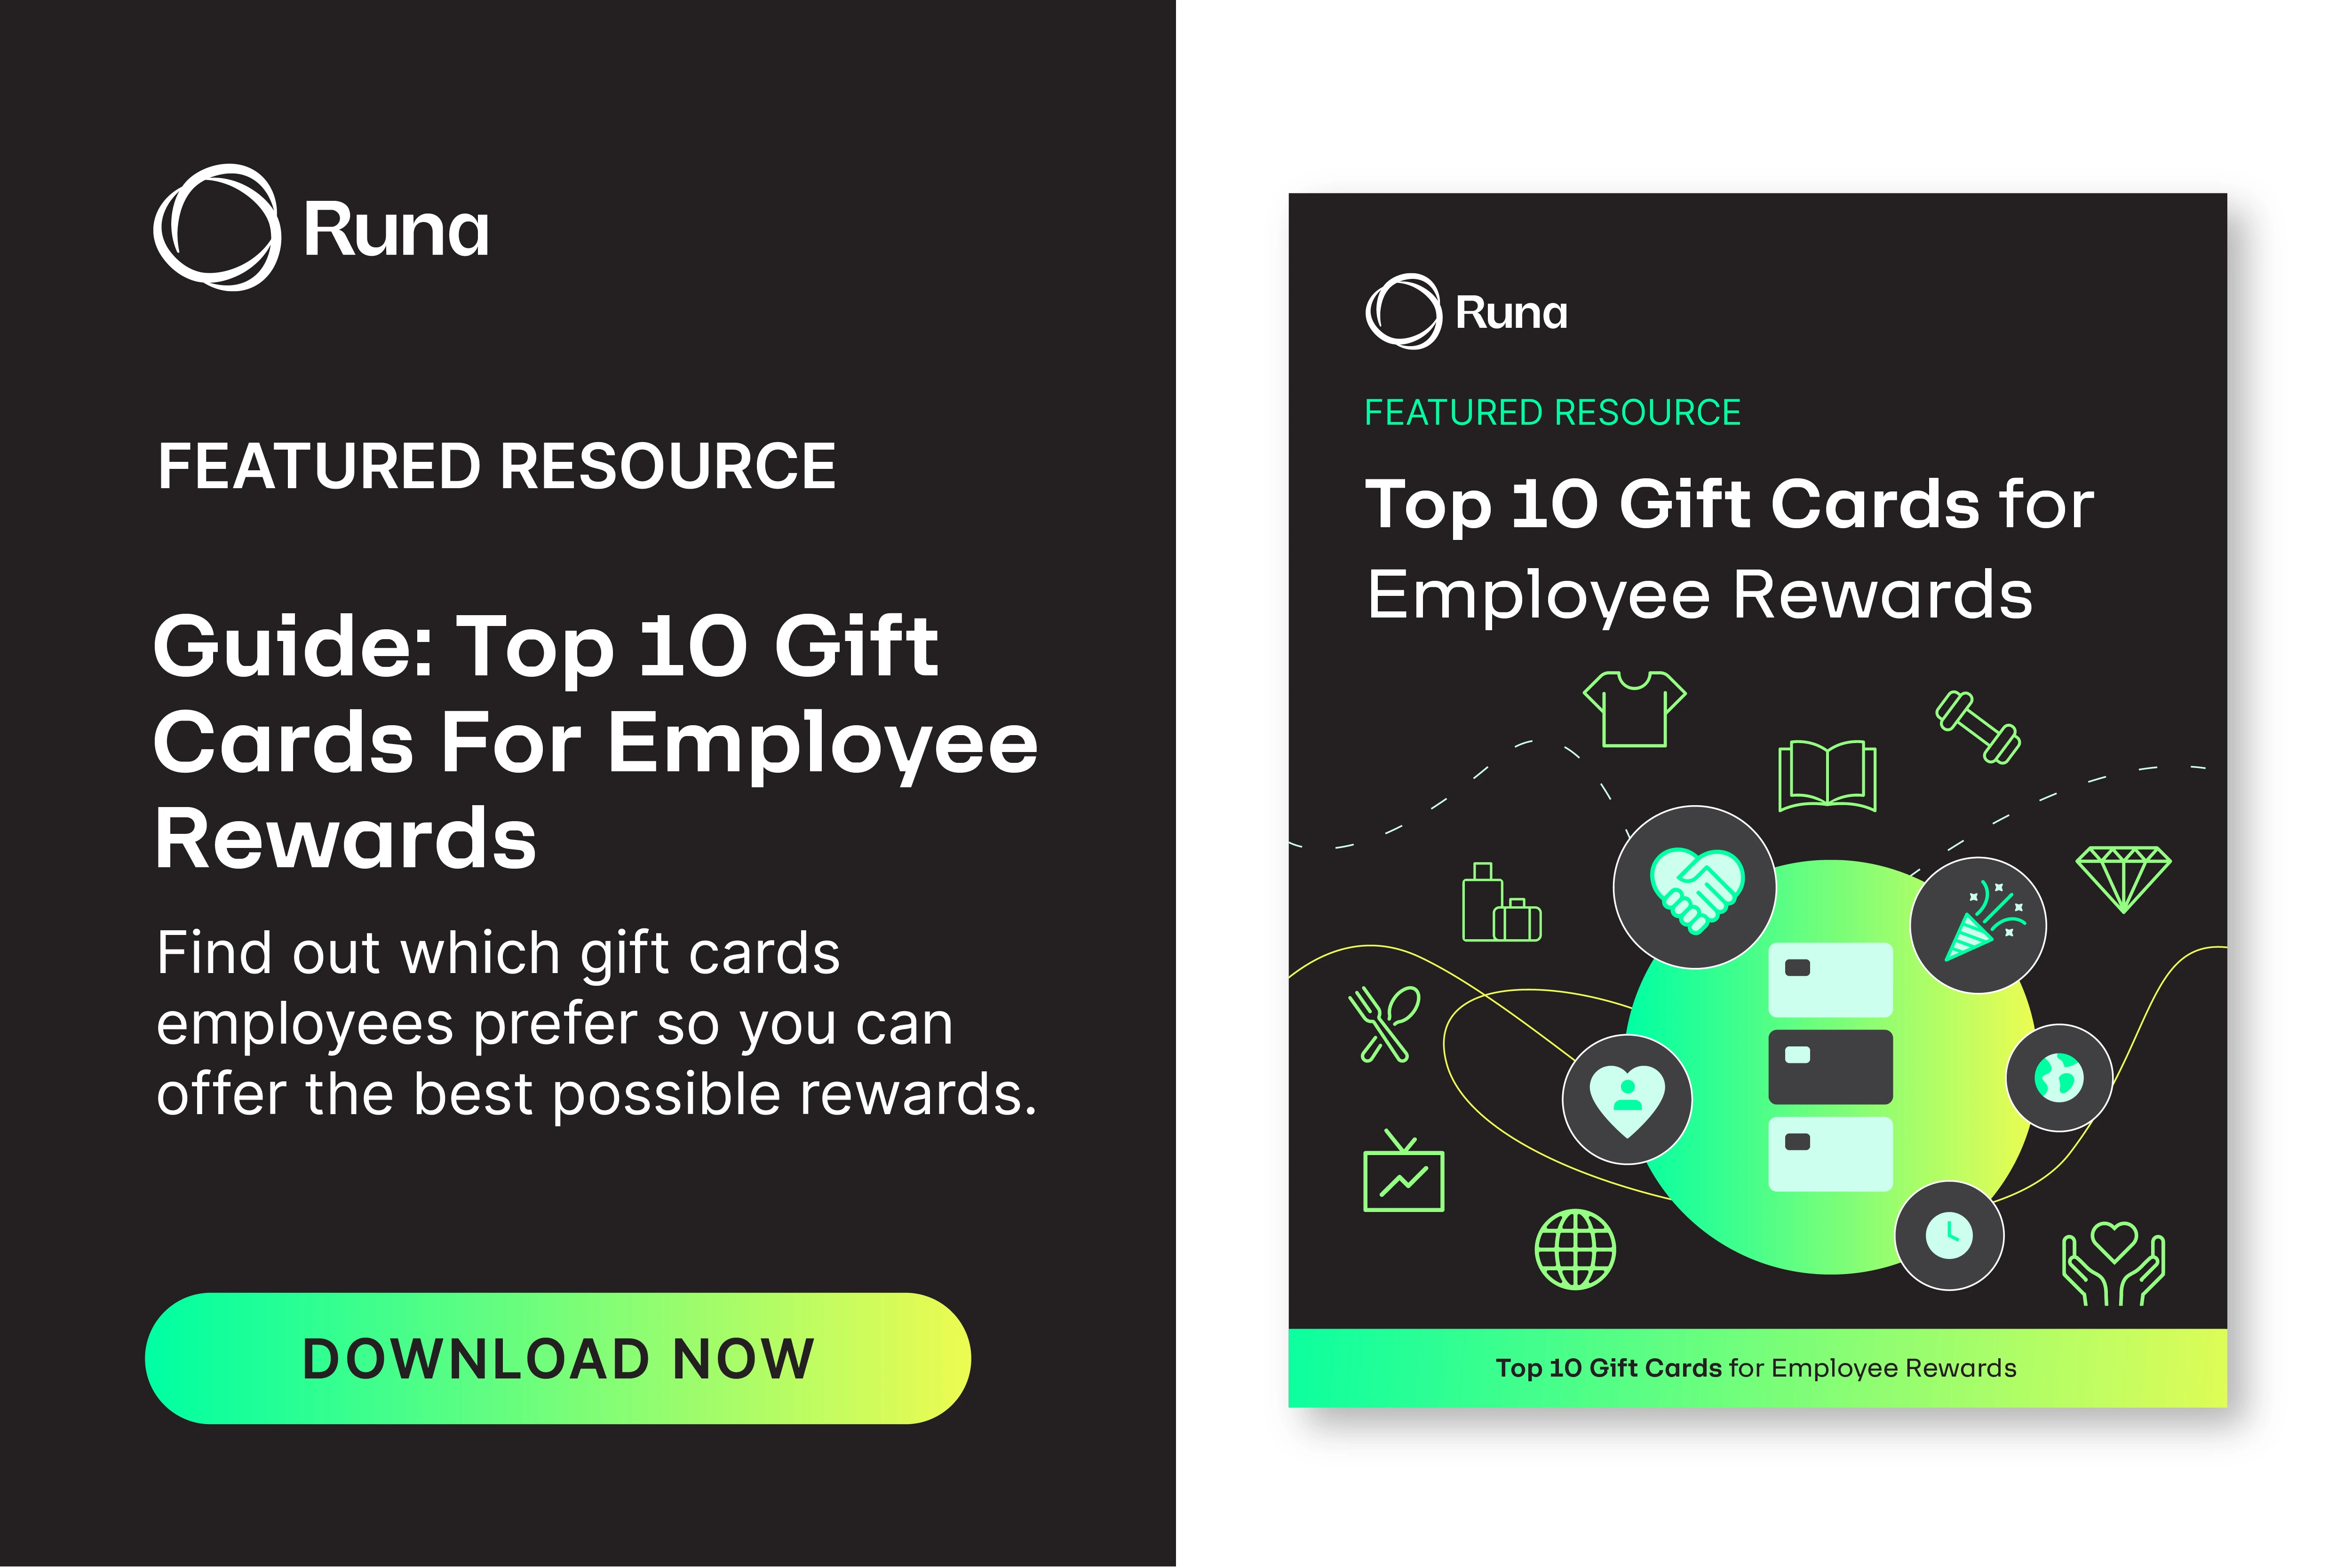 Corporate Gift Card - Bia education